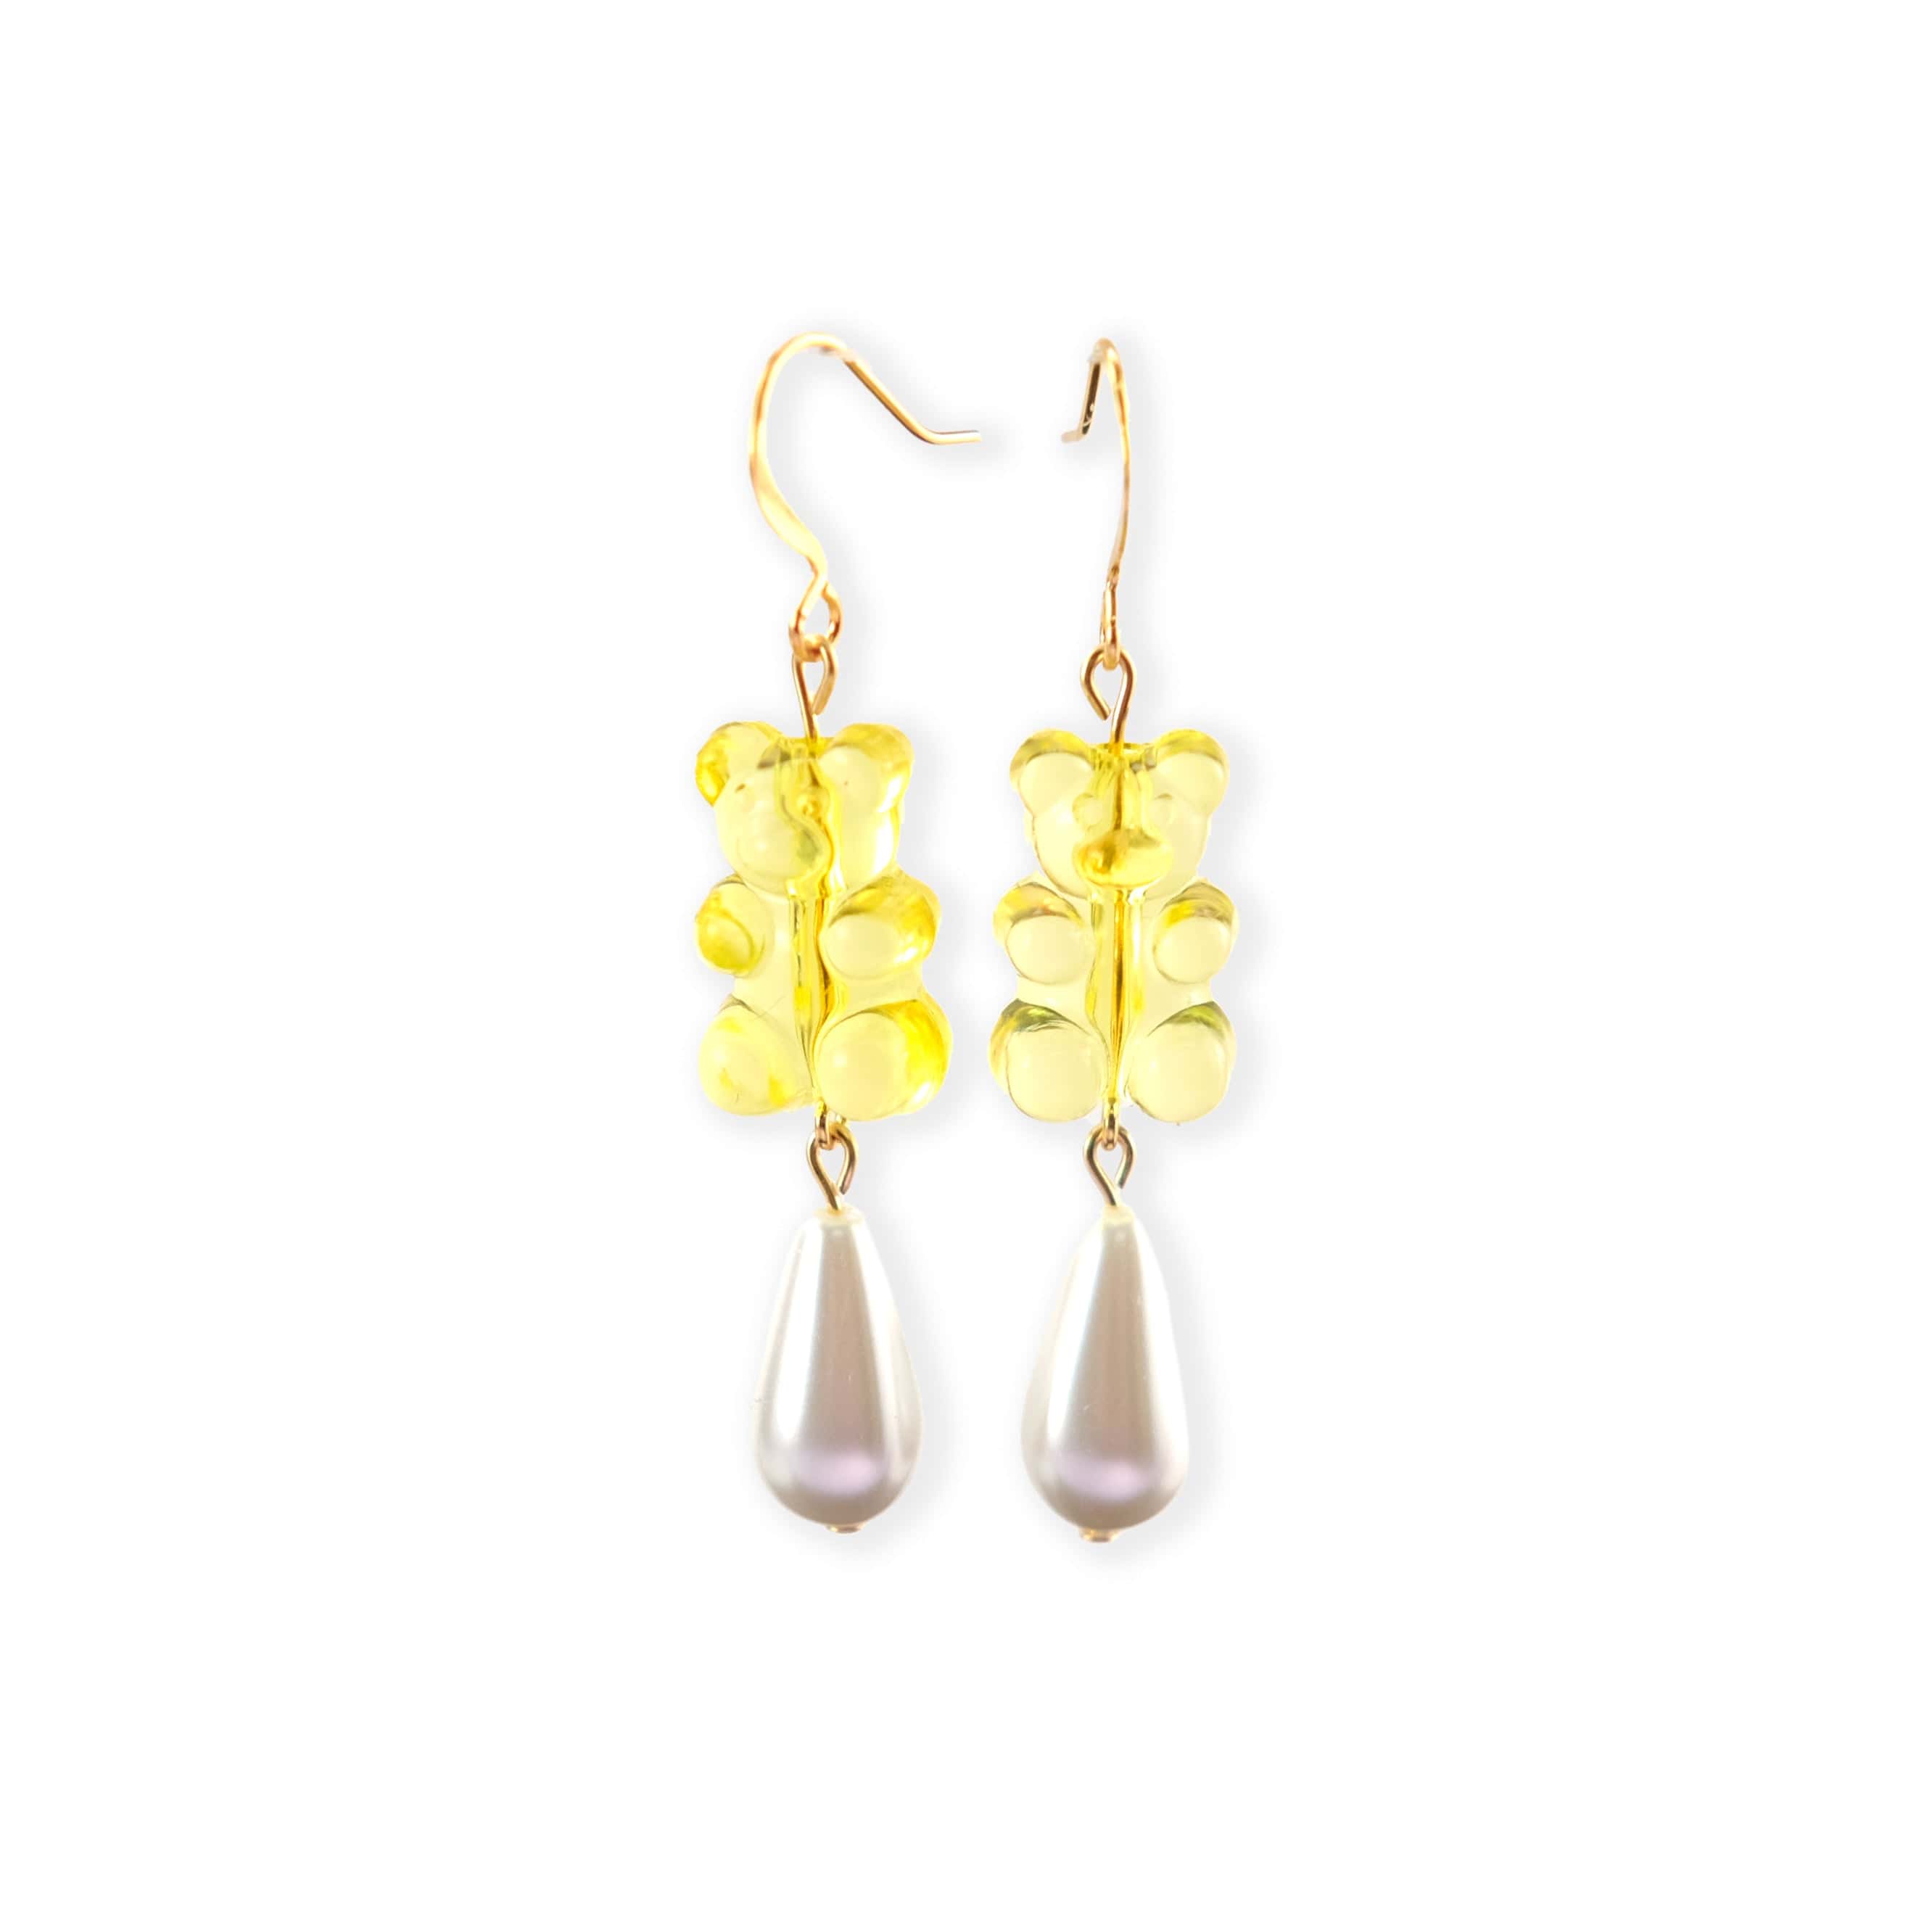 Nostalgic yellow gummy bear dangly earrings with elegant pearl drops #color_yellow